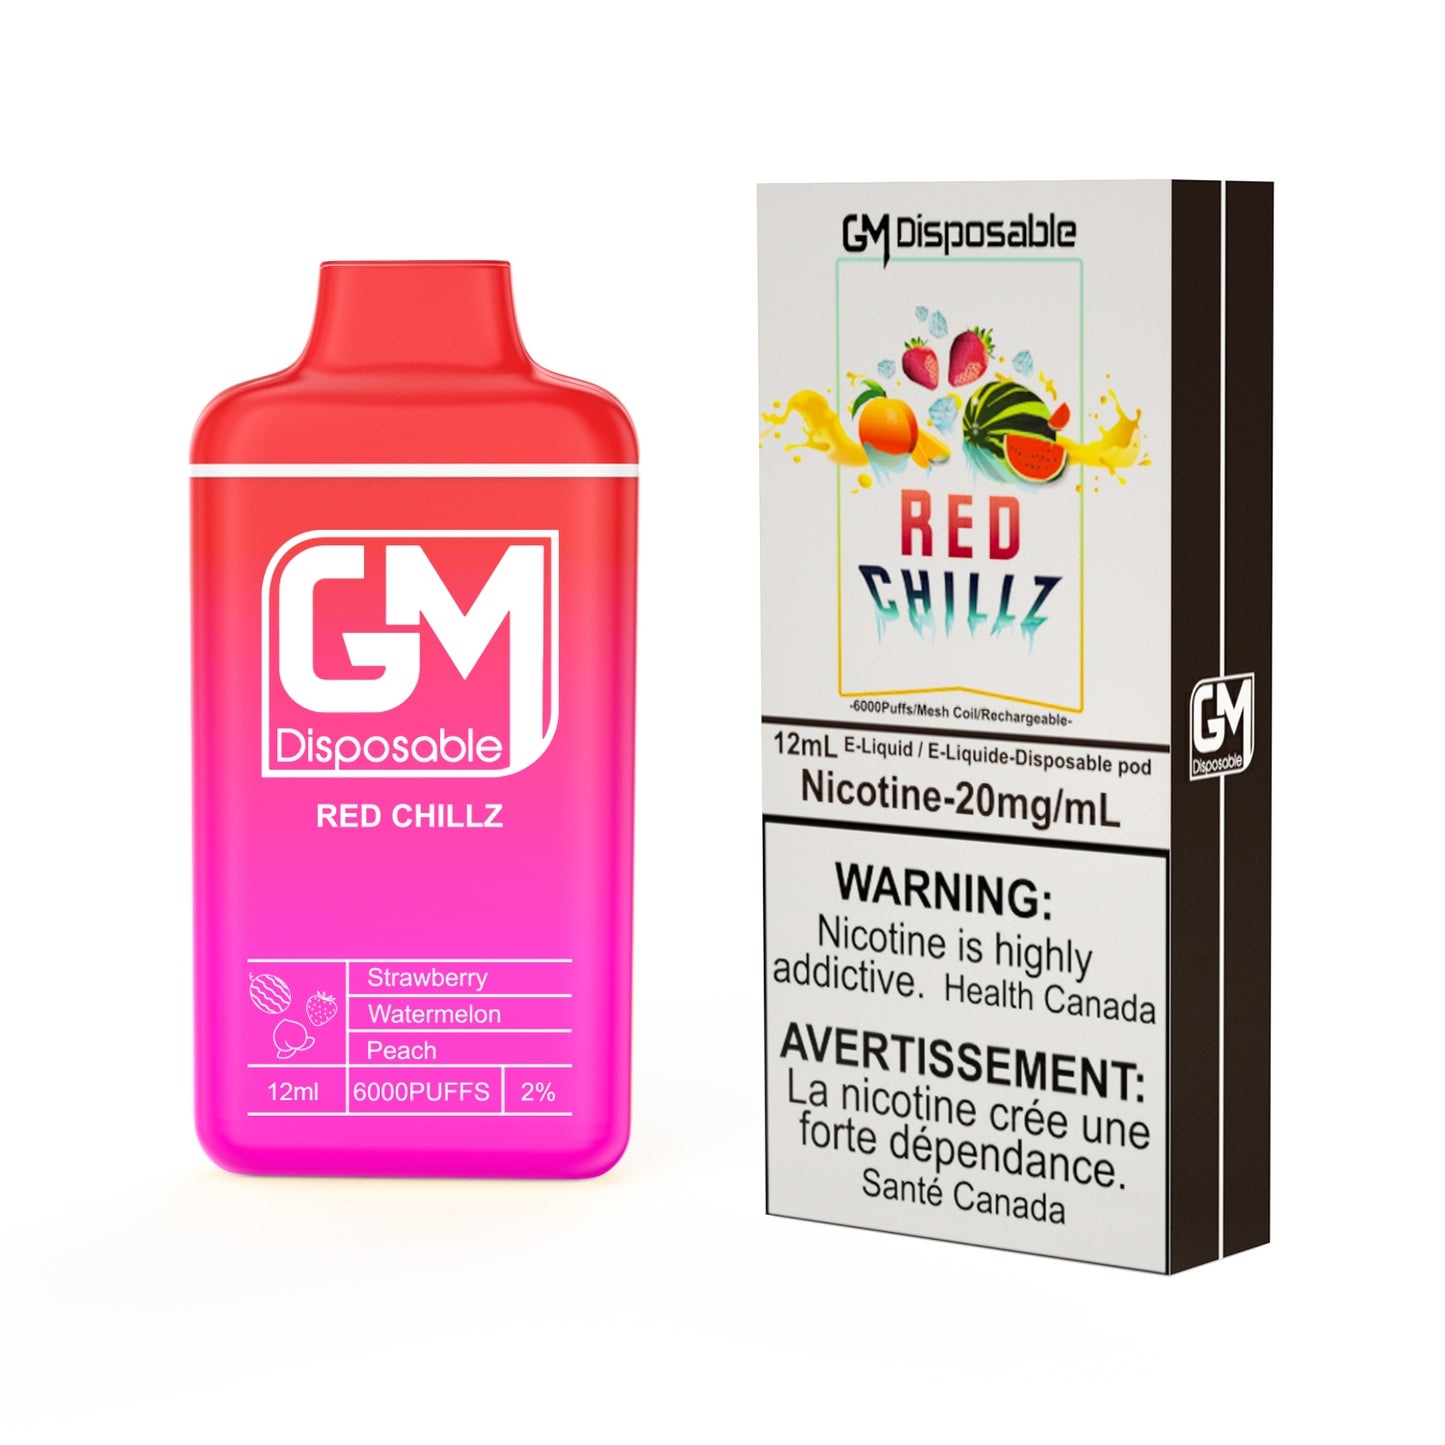 GM Disposable RED CHILLZ